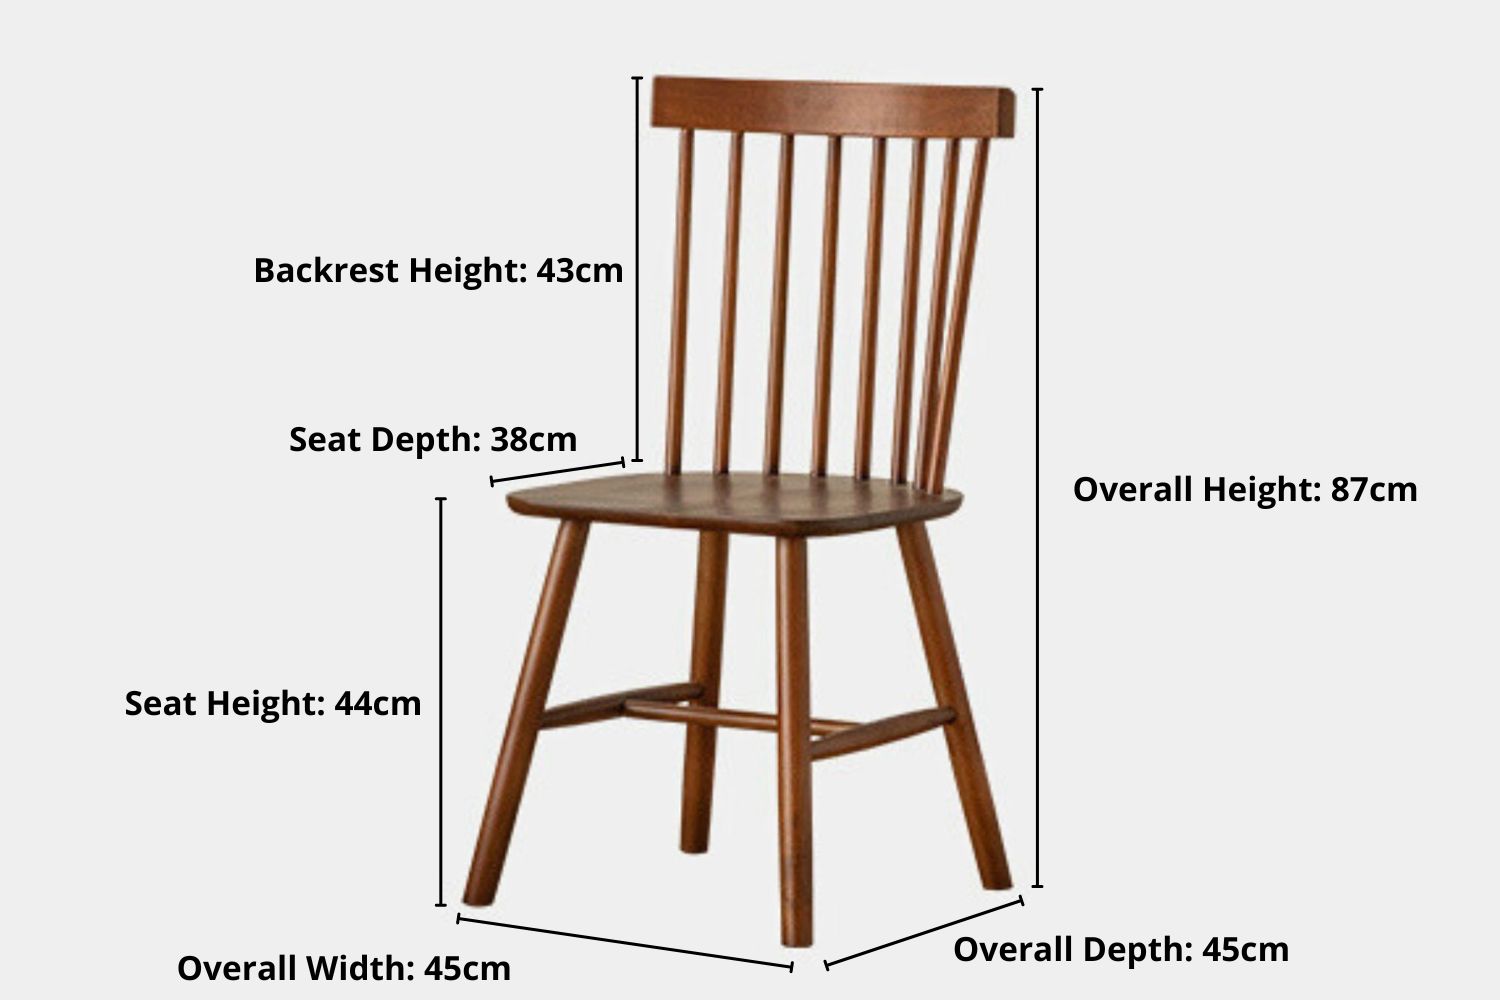 Key product dimensions such as depth, width and height for Toby Poplar Wood Chair